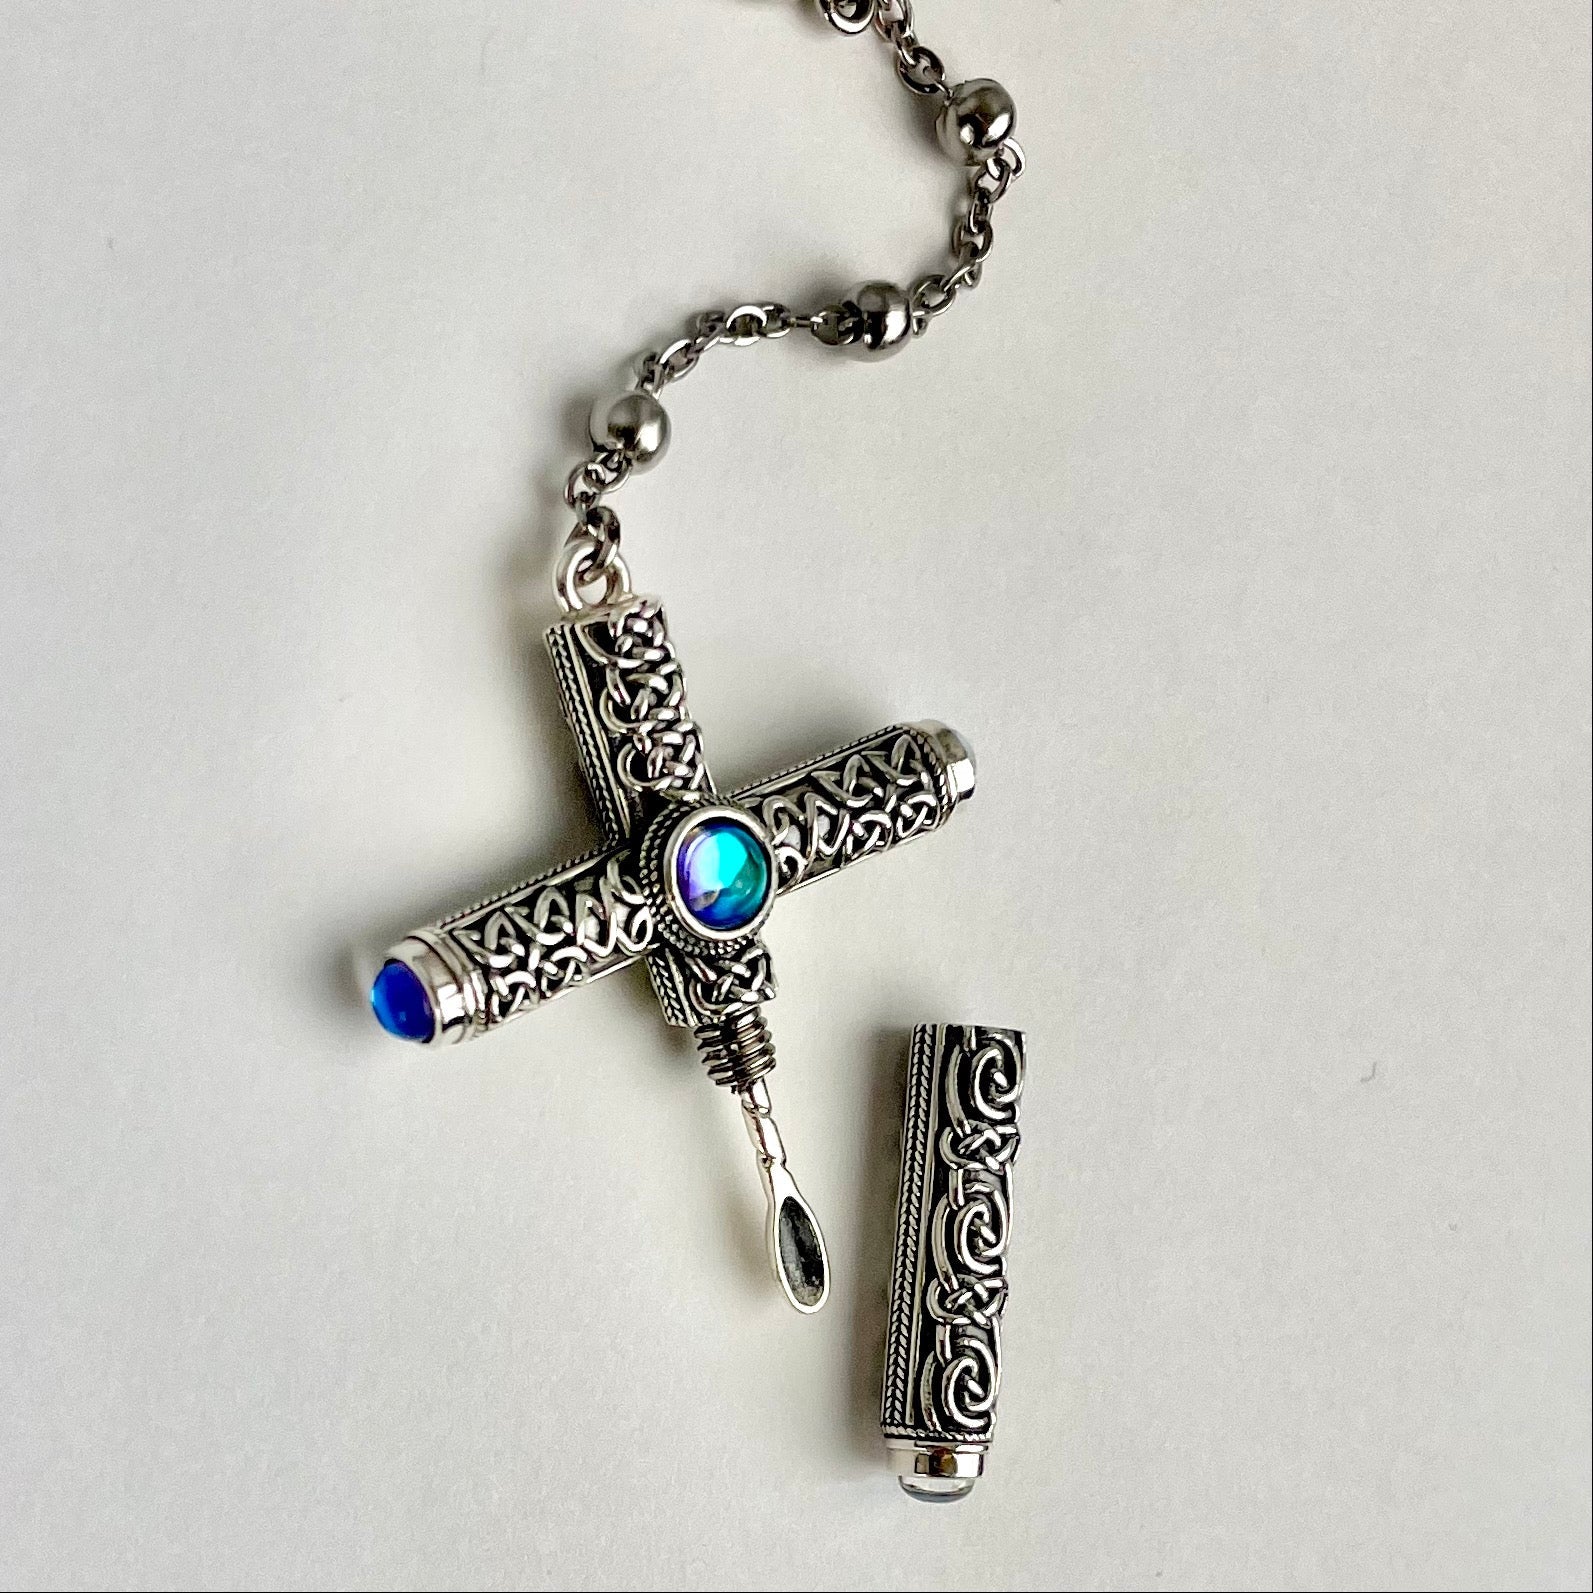 where to buy cruel intentions necklace｜TikTok Search